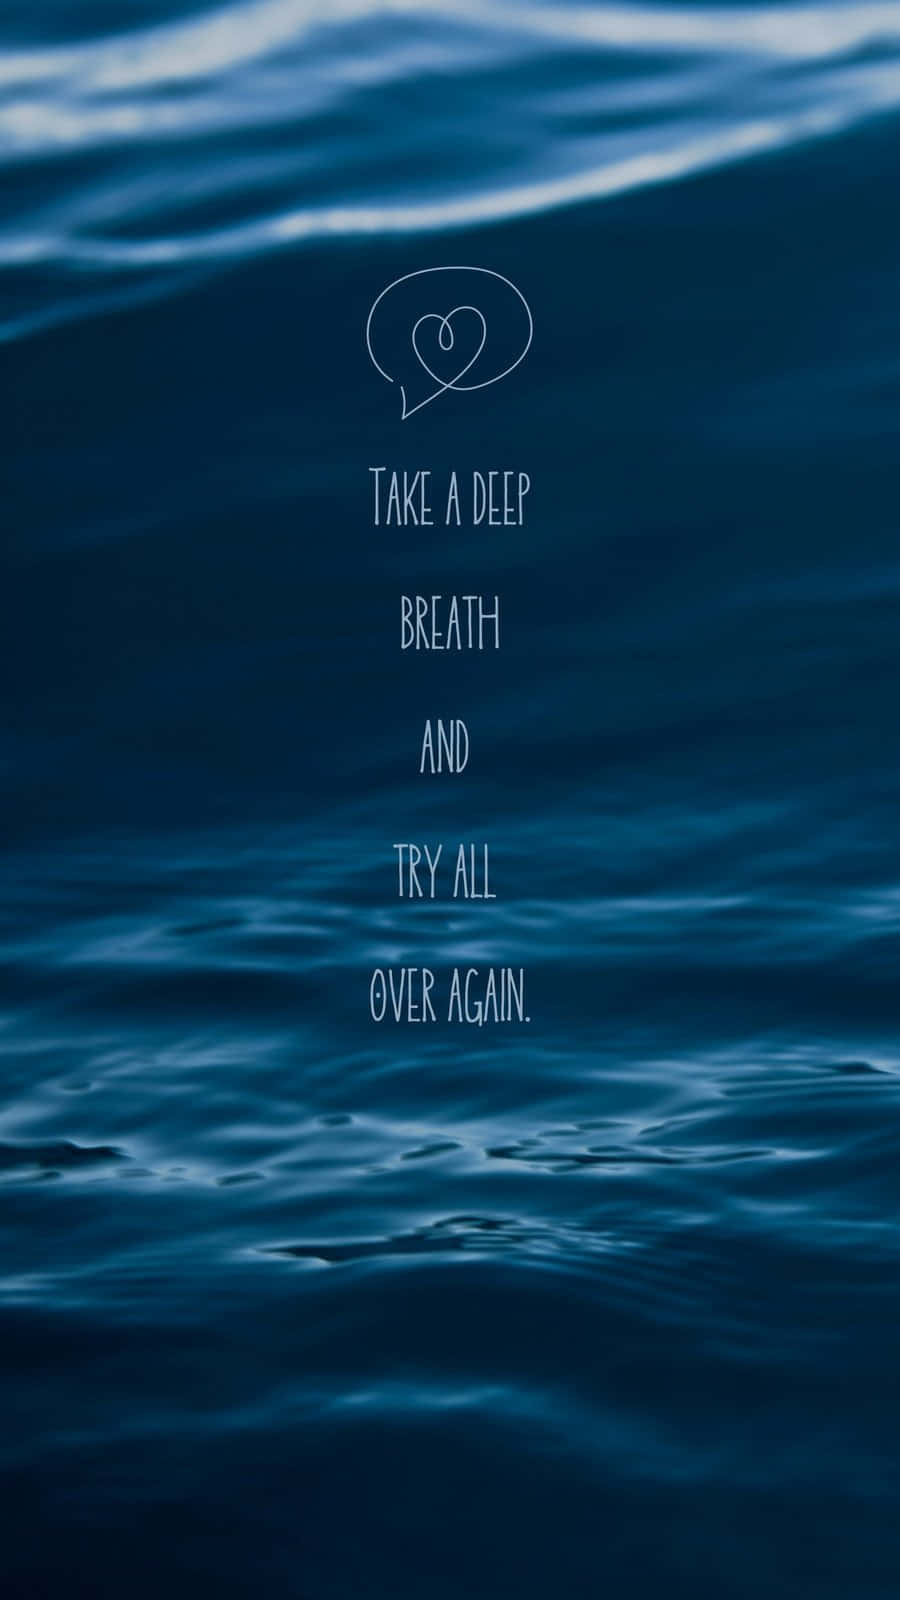 Inspirational Quote Over Water Background Wallpaper